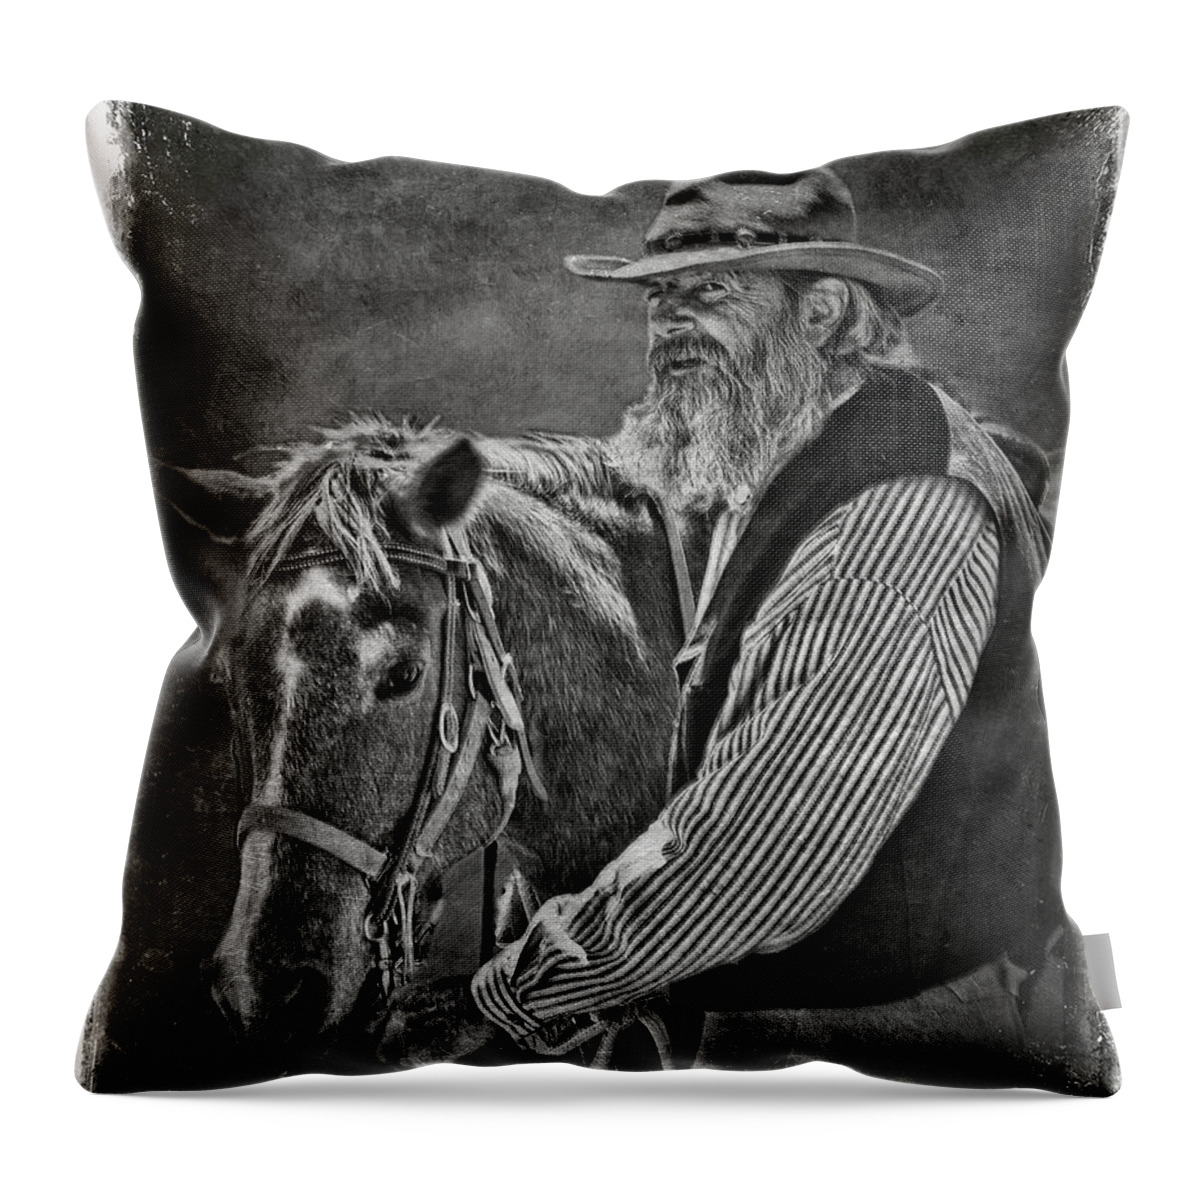 Reenactment Pals At Fort Verde Throw Pillow featuring the photograph Reenactment Pals at Fort Verde by Priscilla Burgers